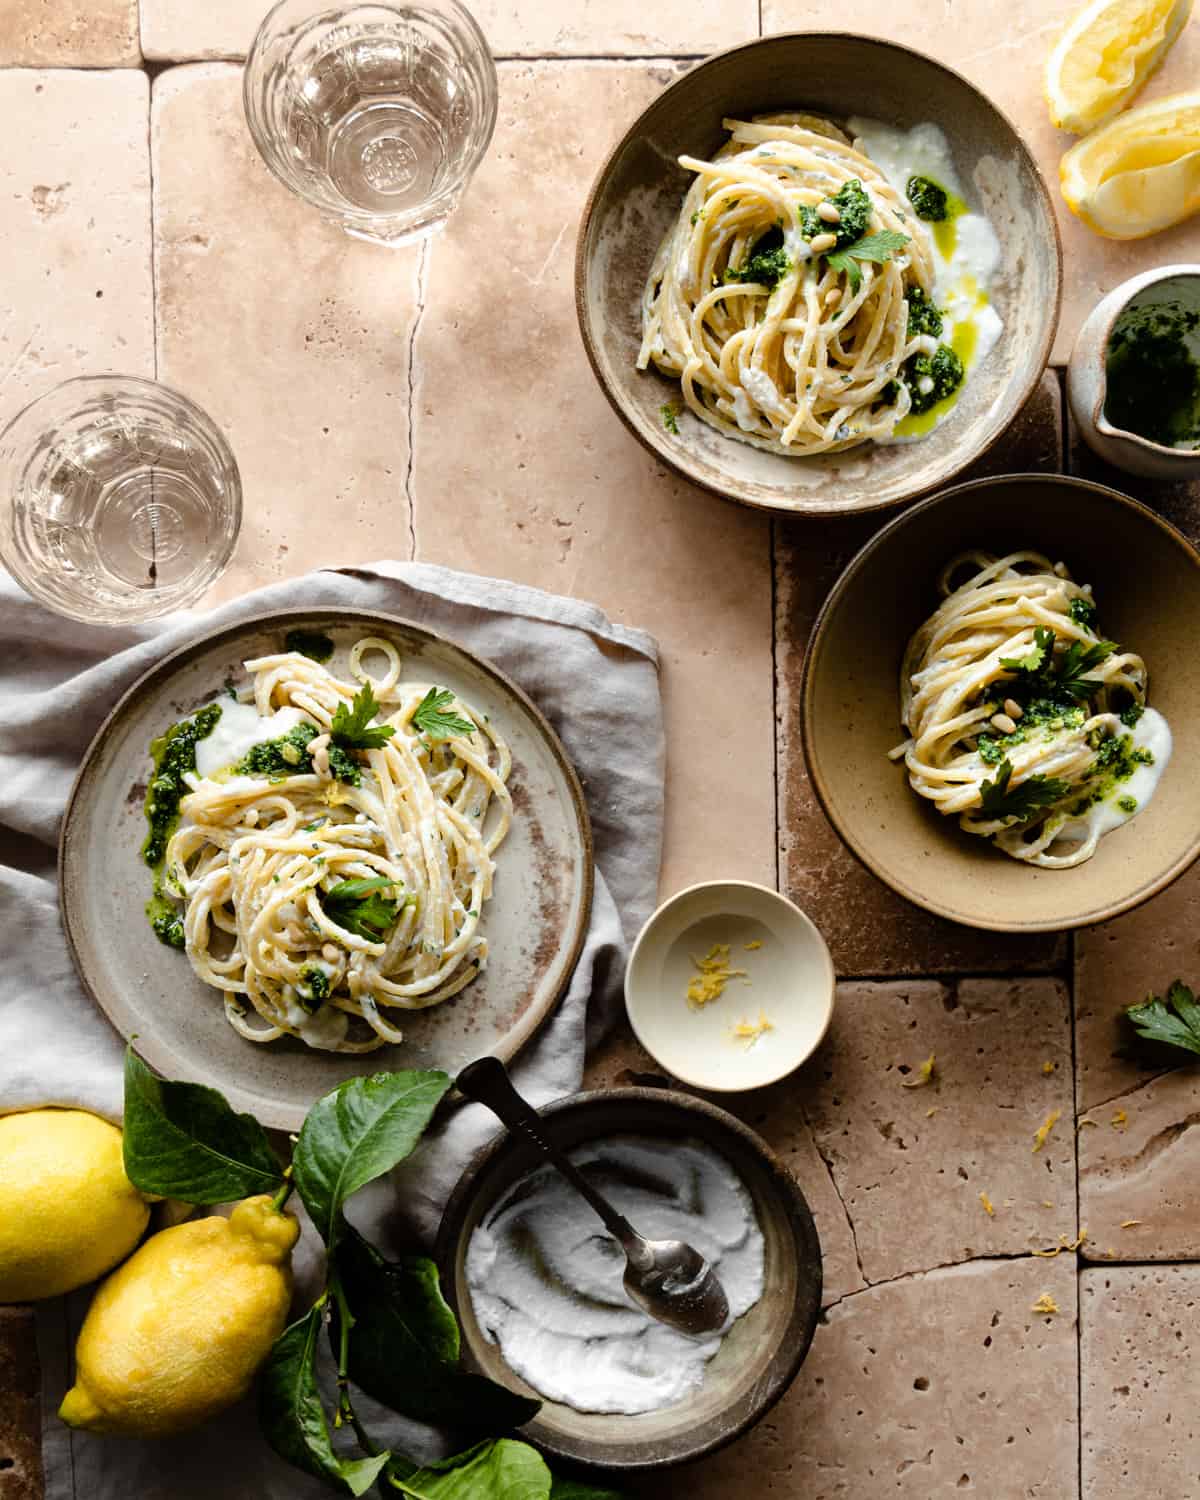 Pasta with ricotta and lemon on differents bowls with lemons around and parsley pesto.